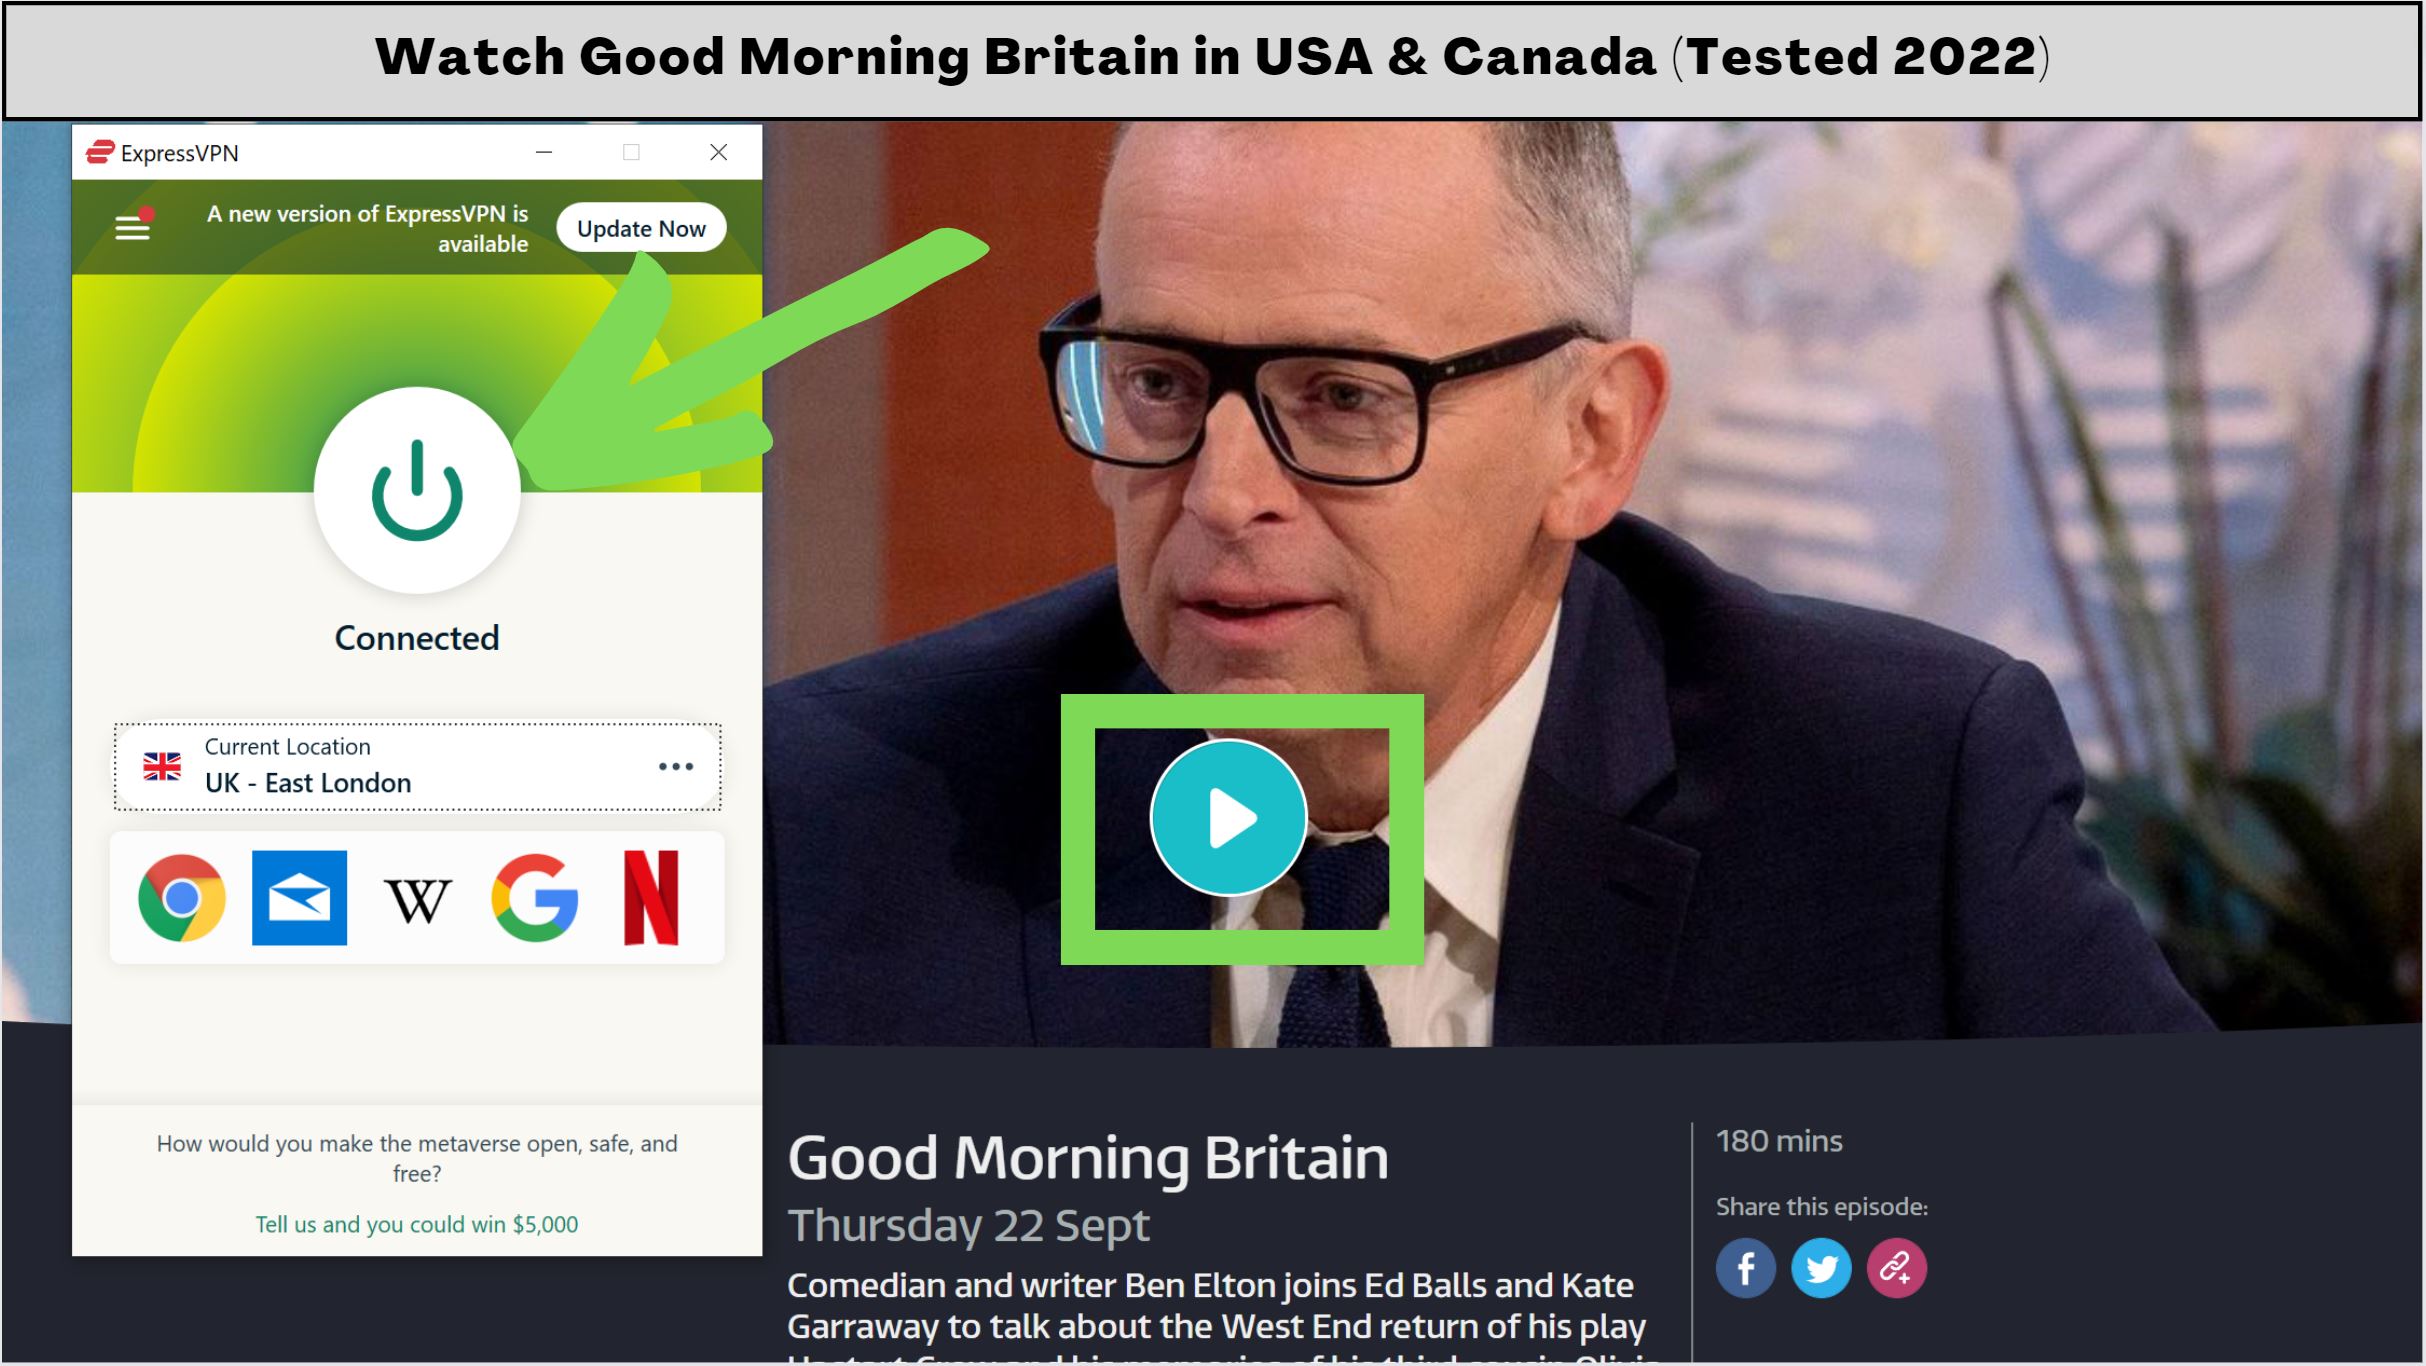 watch Good Morning Britain in the US